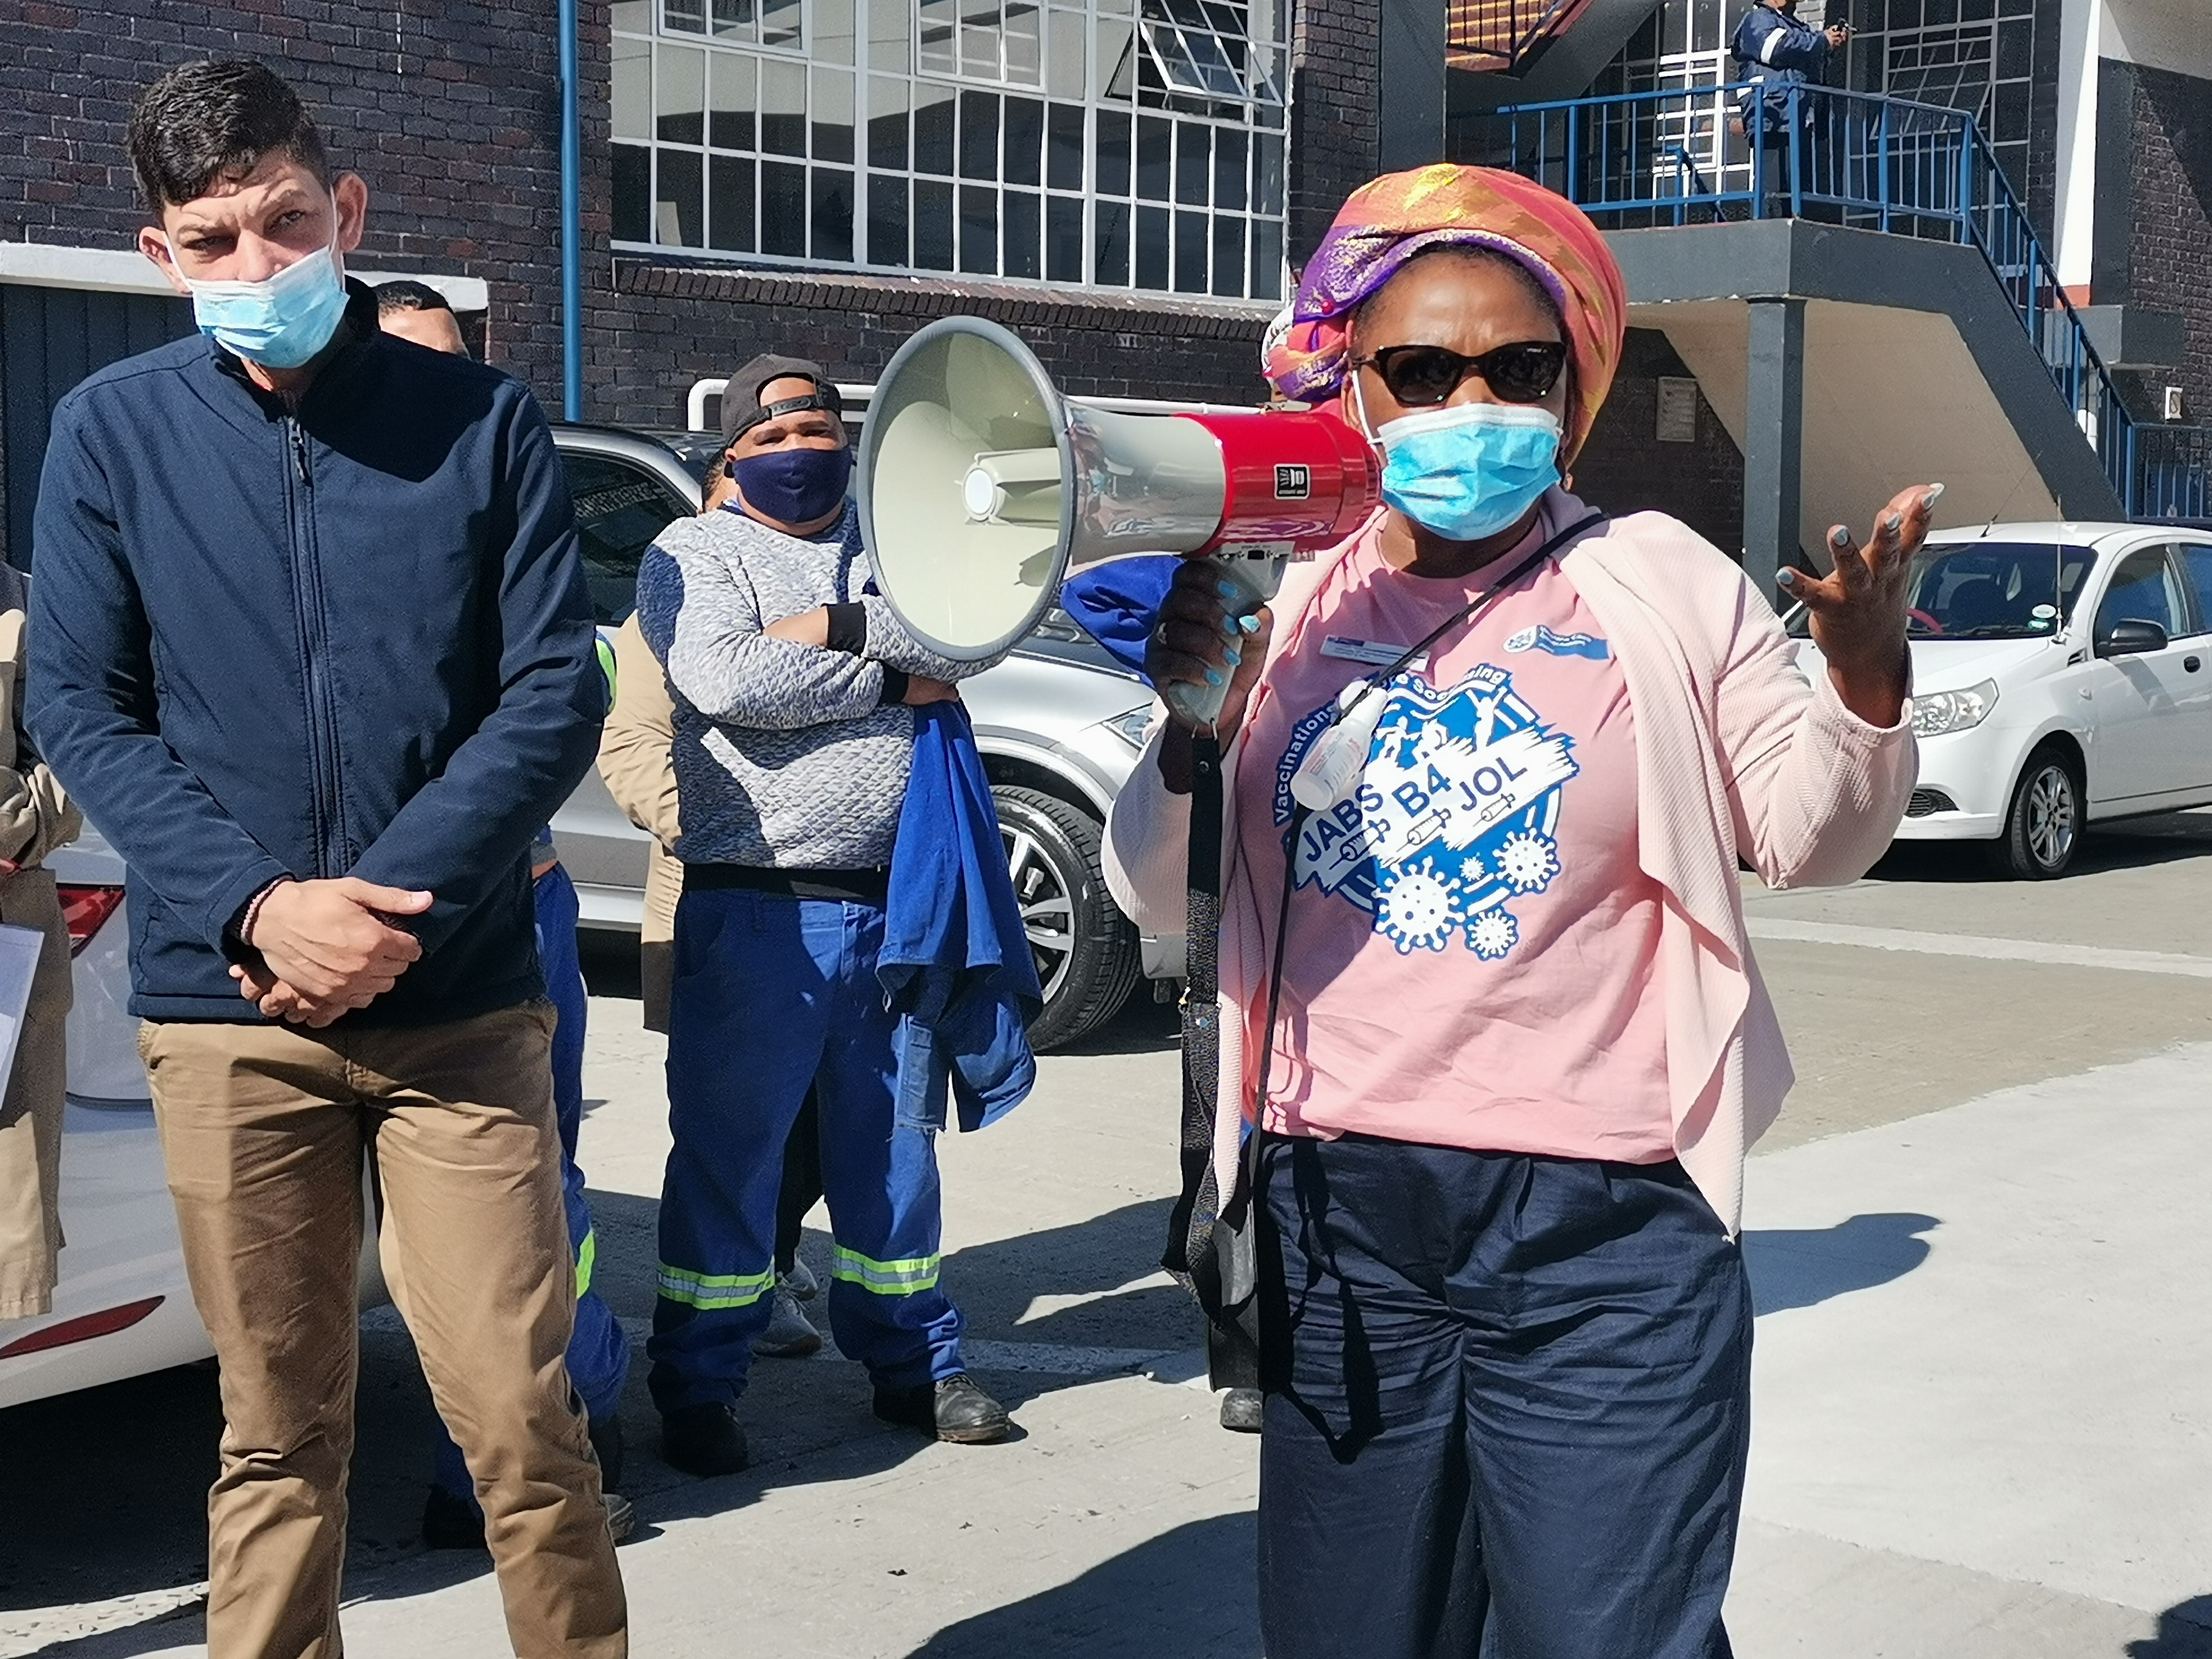 Minister of Health Dr Nomafrench Mbombo and Minister of Public Works Daylin Mitchell addressed workers during the vaccination outreach at the Golden Arrow Montana Depot outreach.